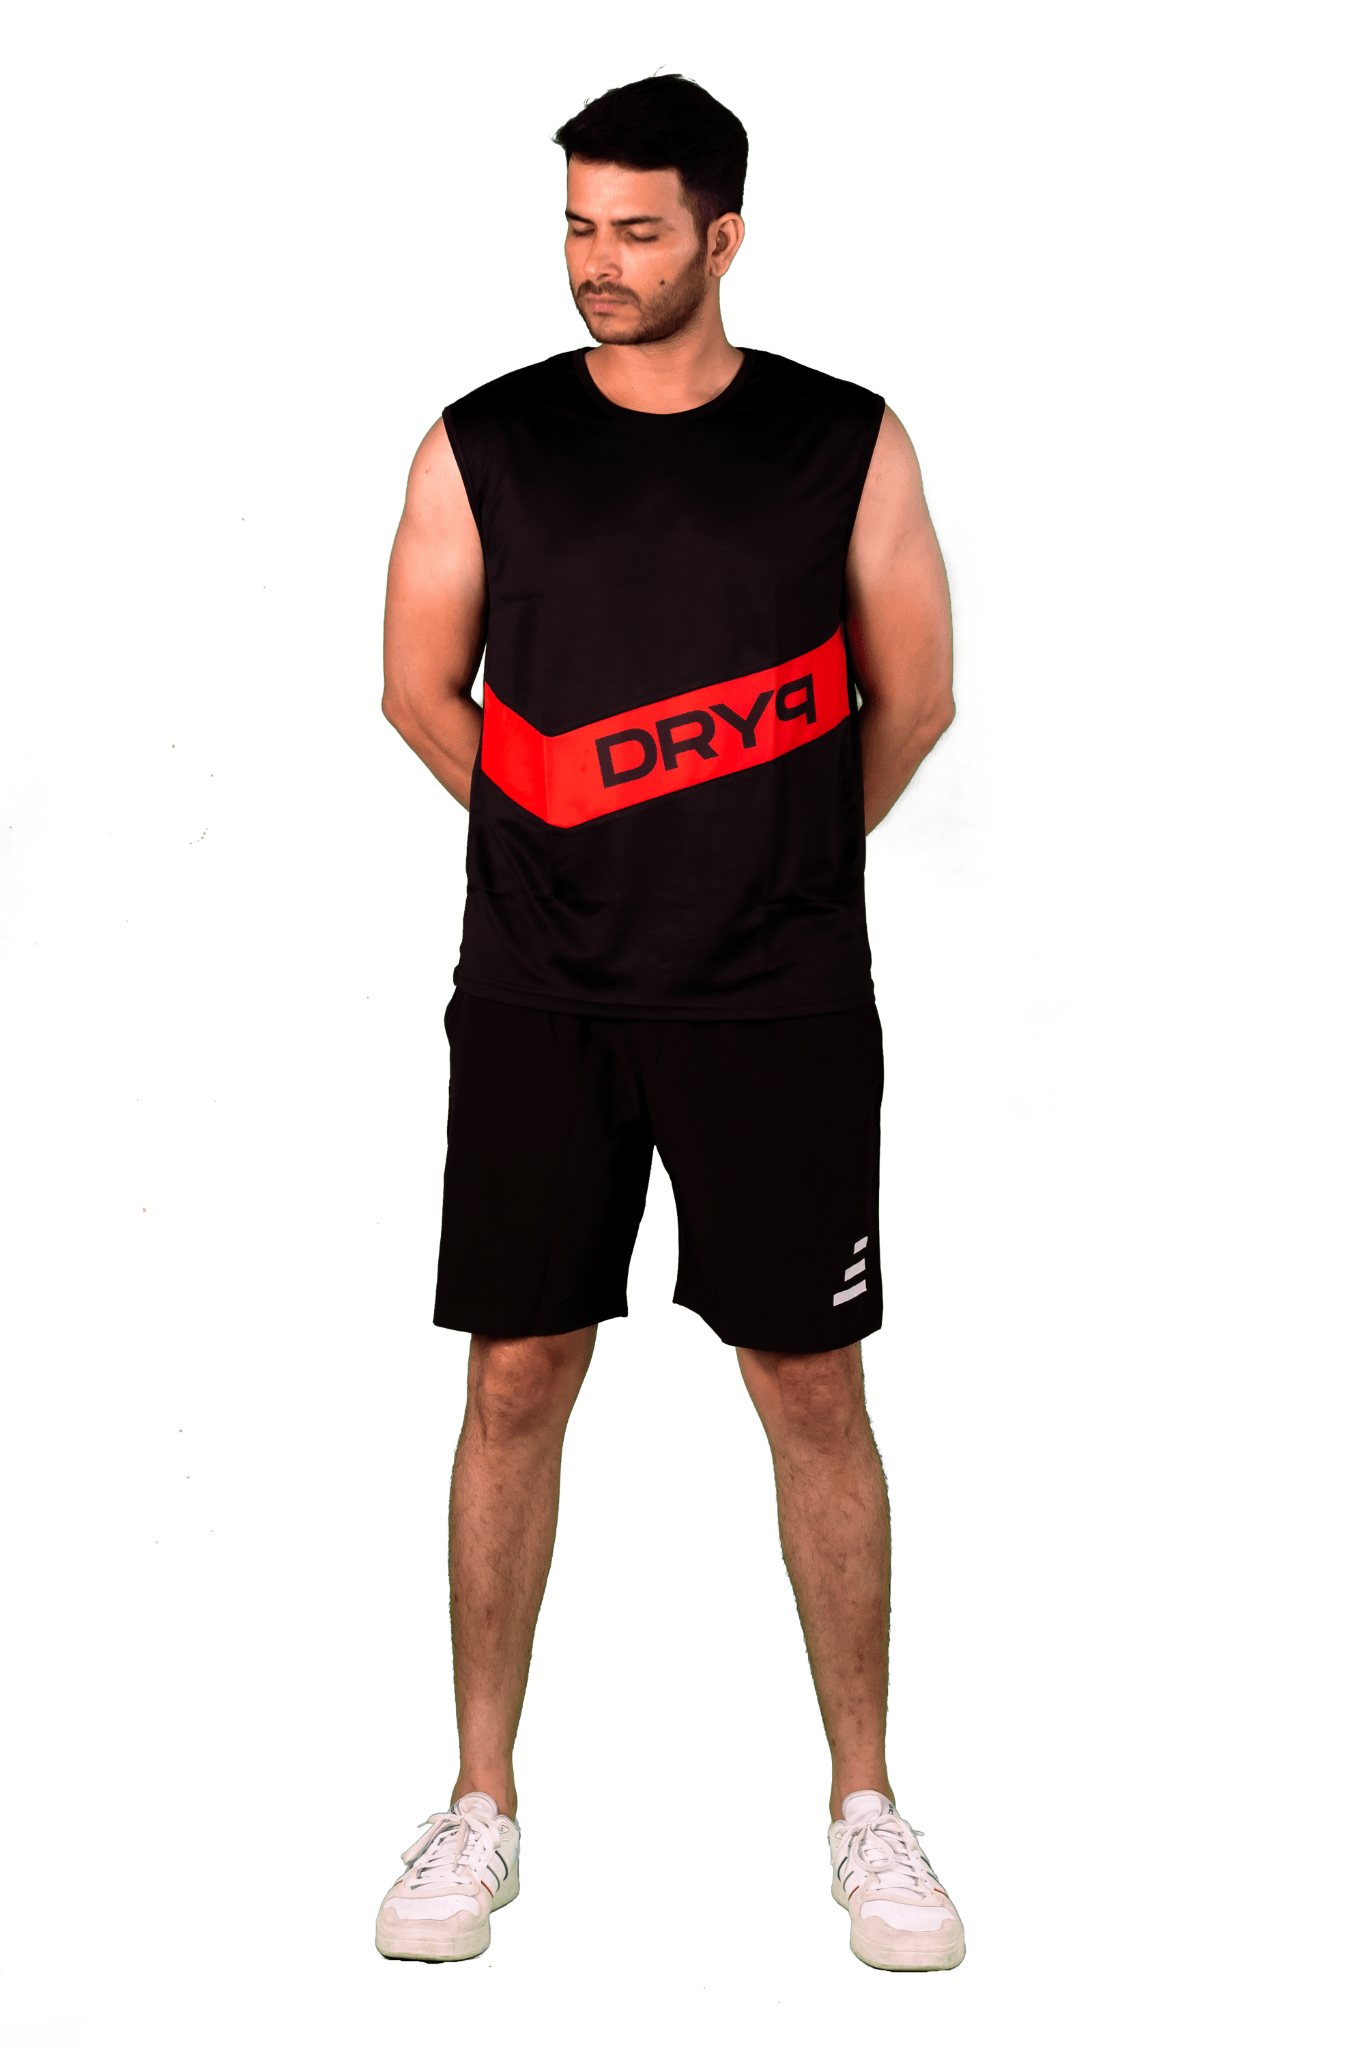 man with DRYP athleisure tank top